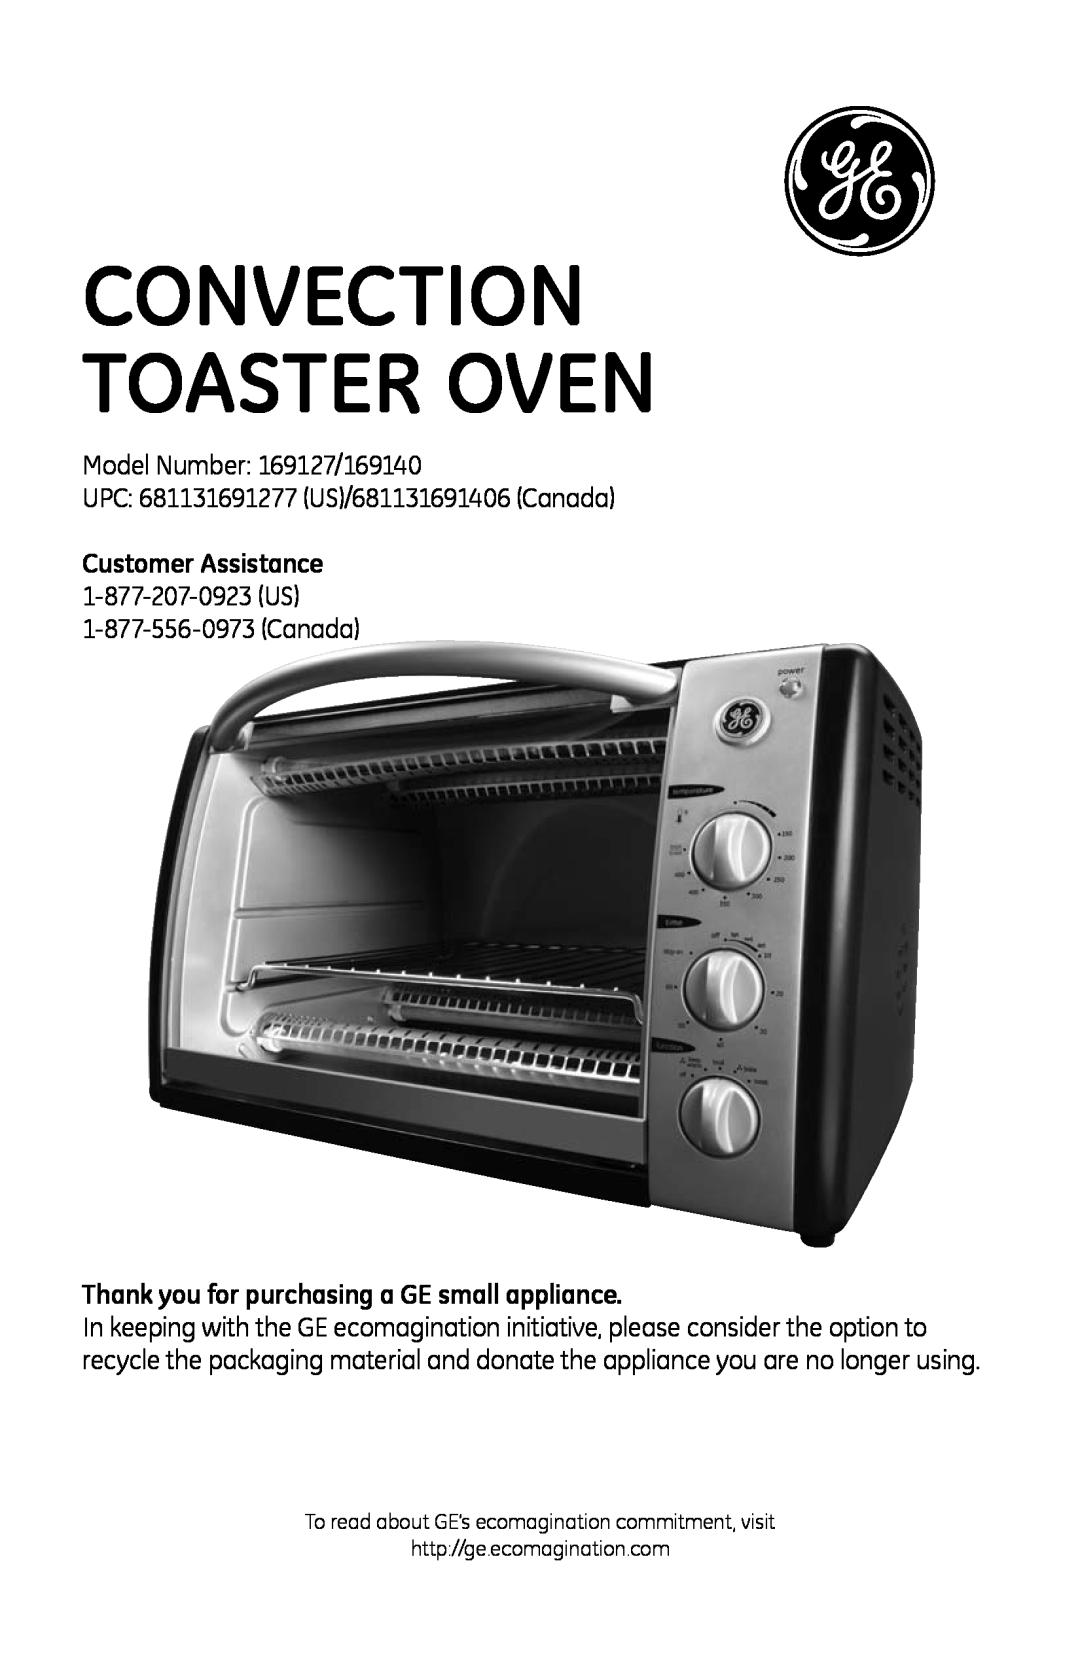 GE 681131691406, 681131691277 manual Convection toaster oven, Thank you for purchasing a GE small appliance 